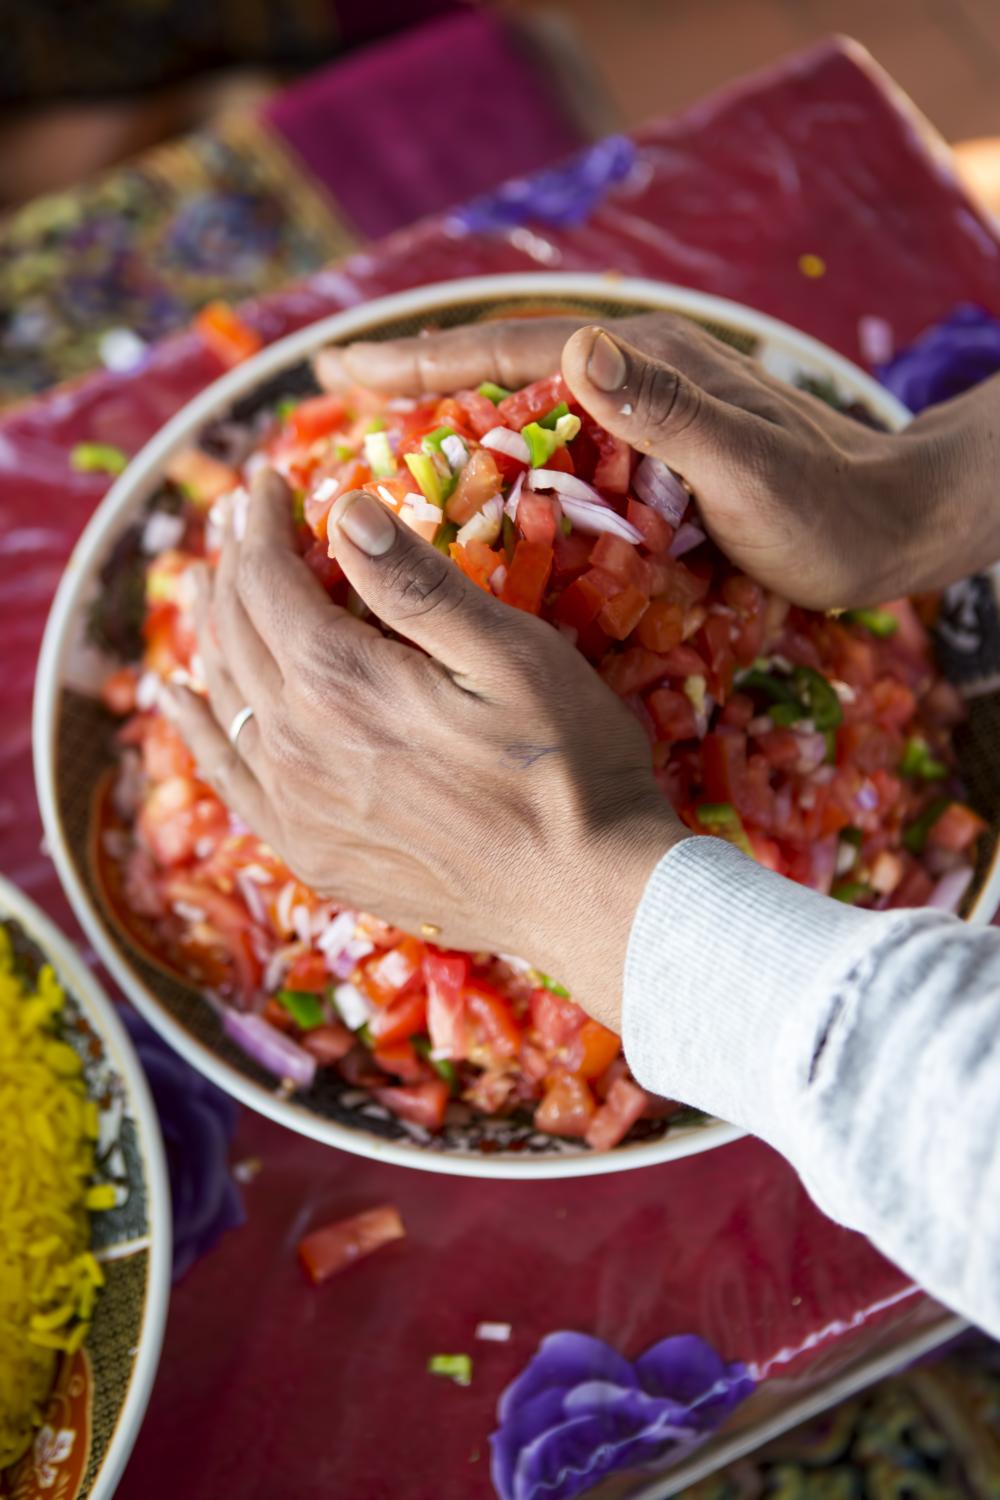 Final touch on salad, Morocco